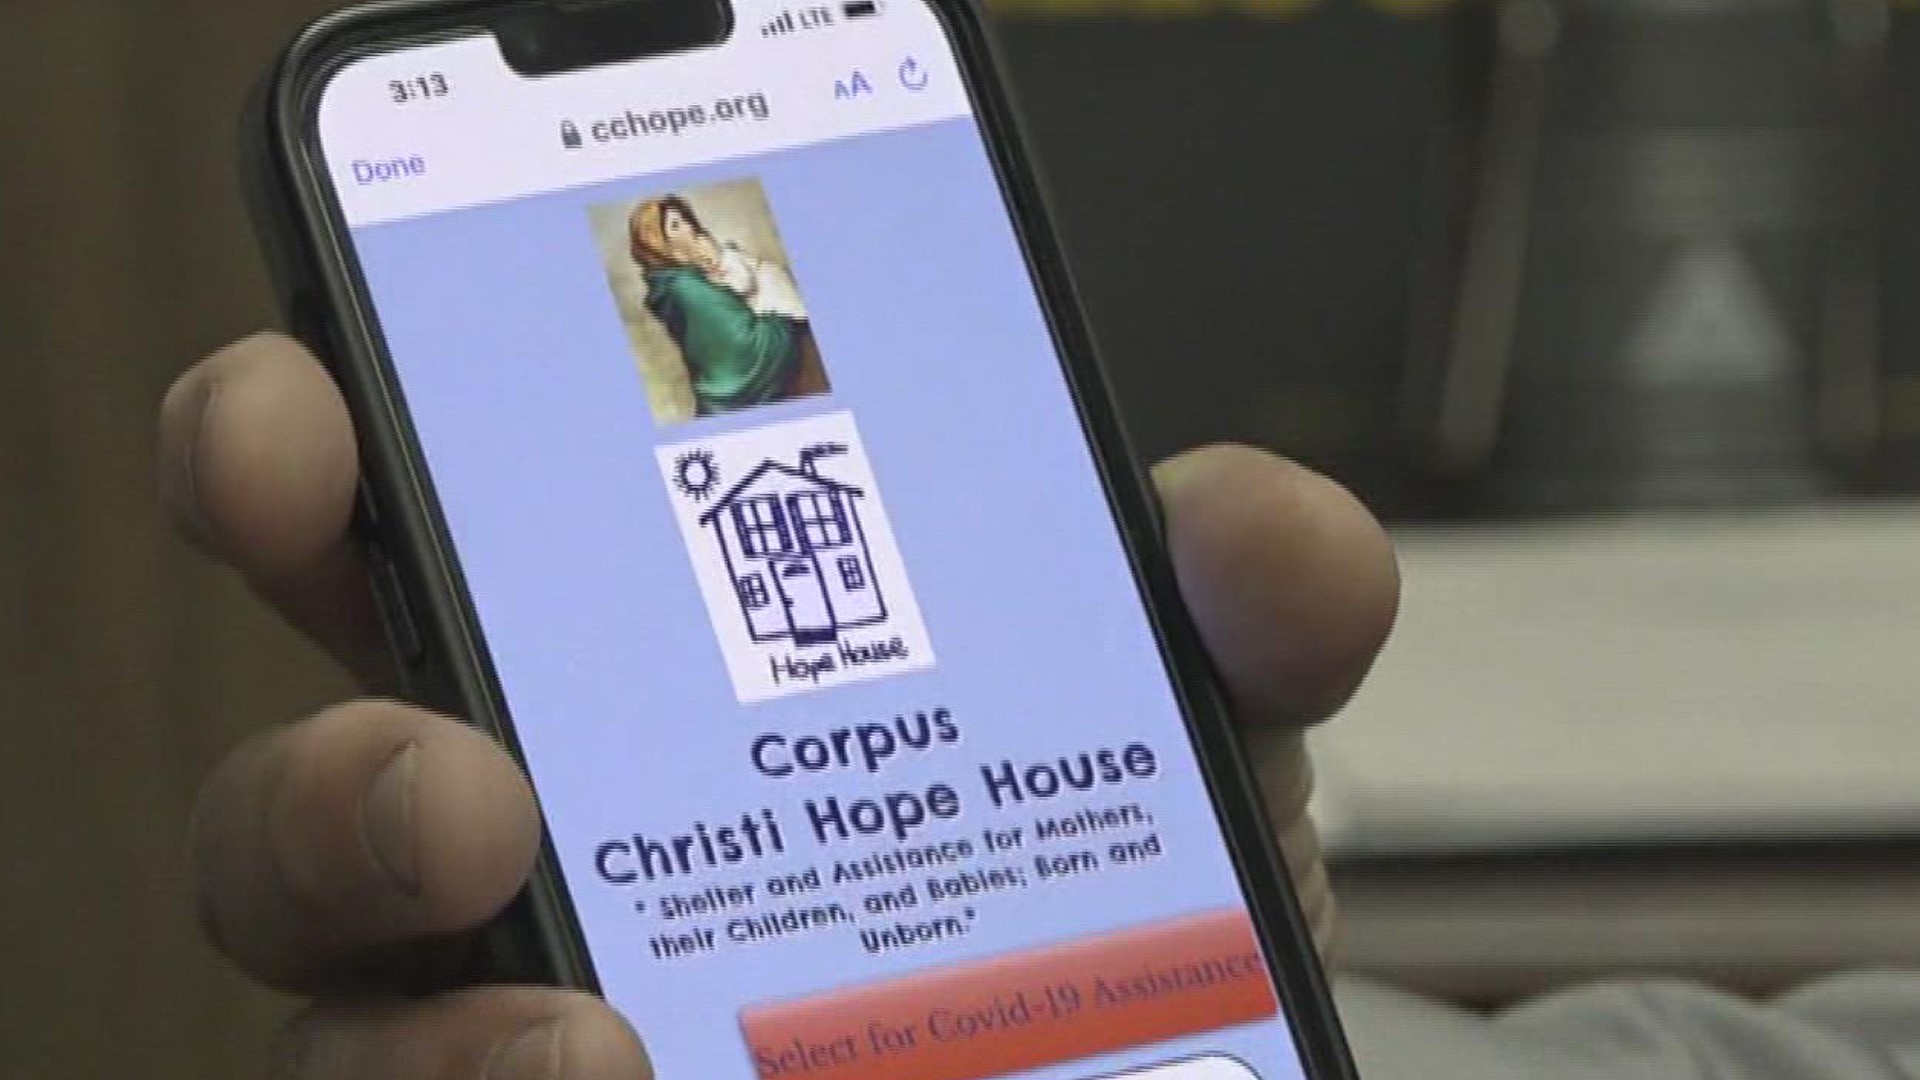 The app is called "Nueces County Sheriff's Office" and can be downloaded for free.